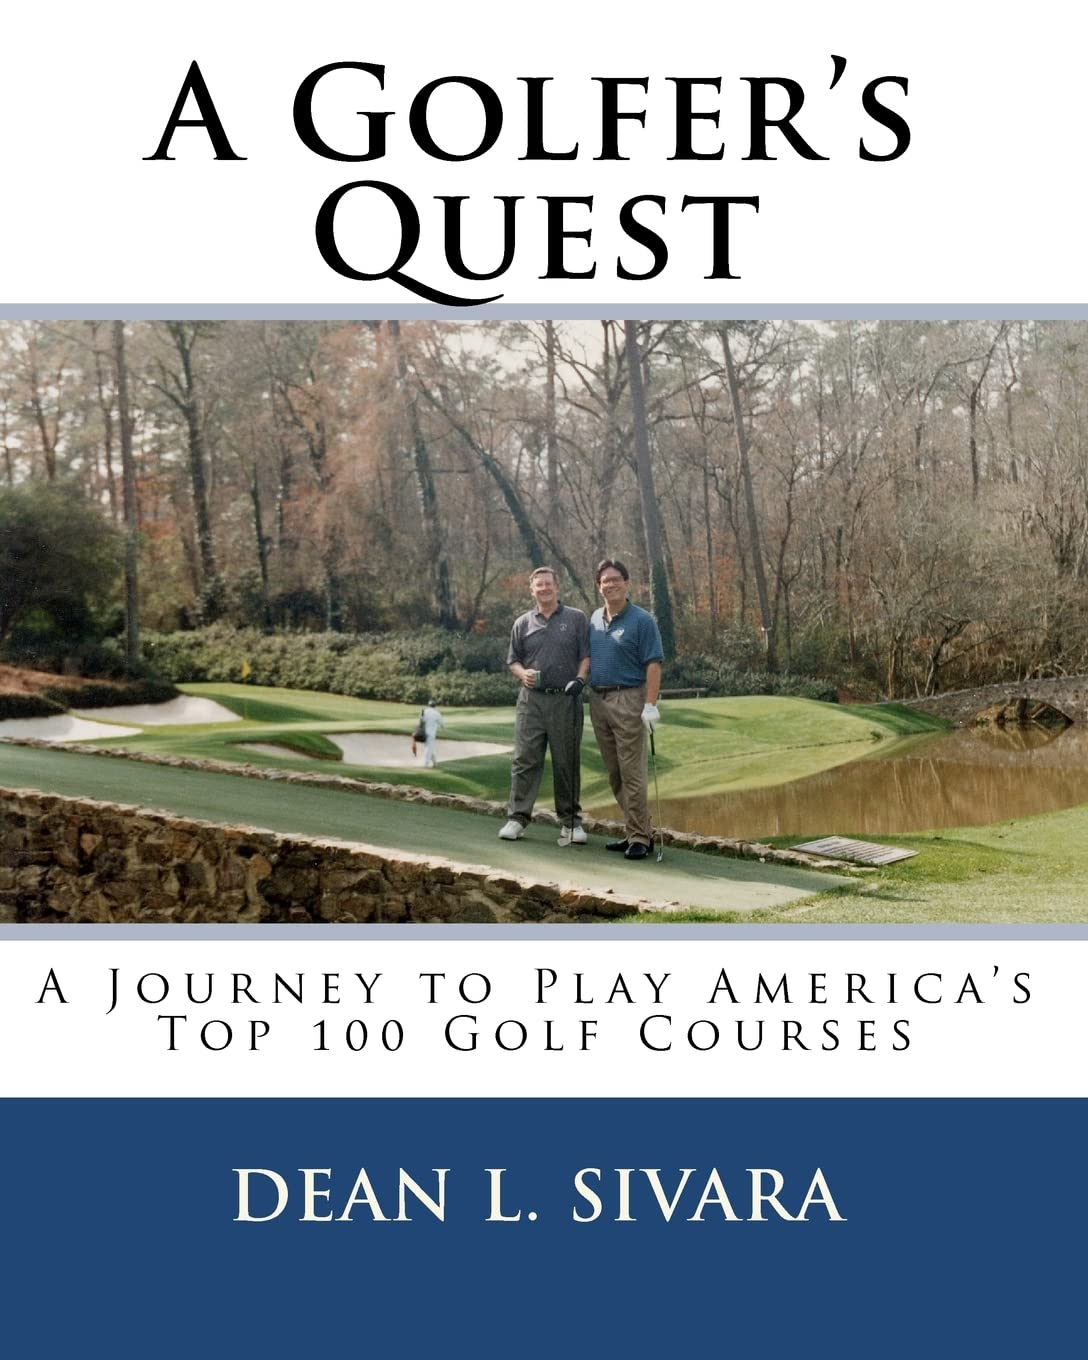 A Golfer's Quest: A Journey to Play America's Top 100 Golf Courses